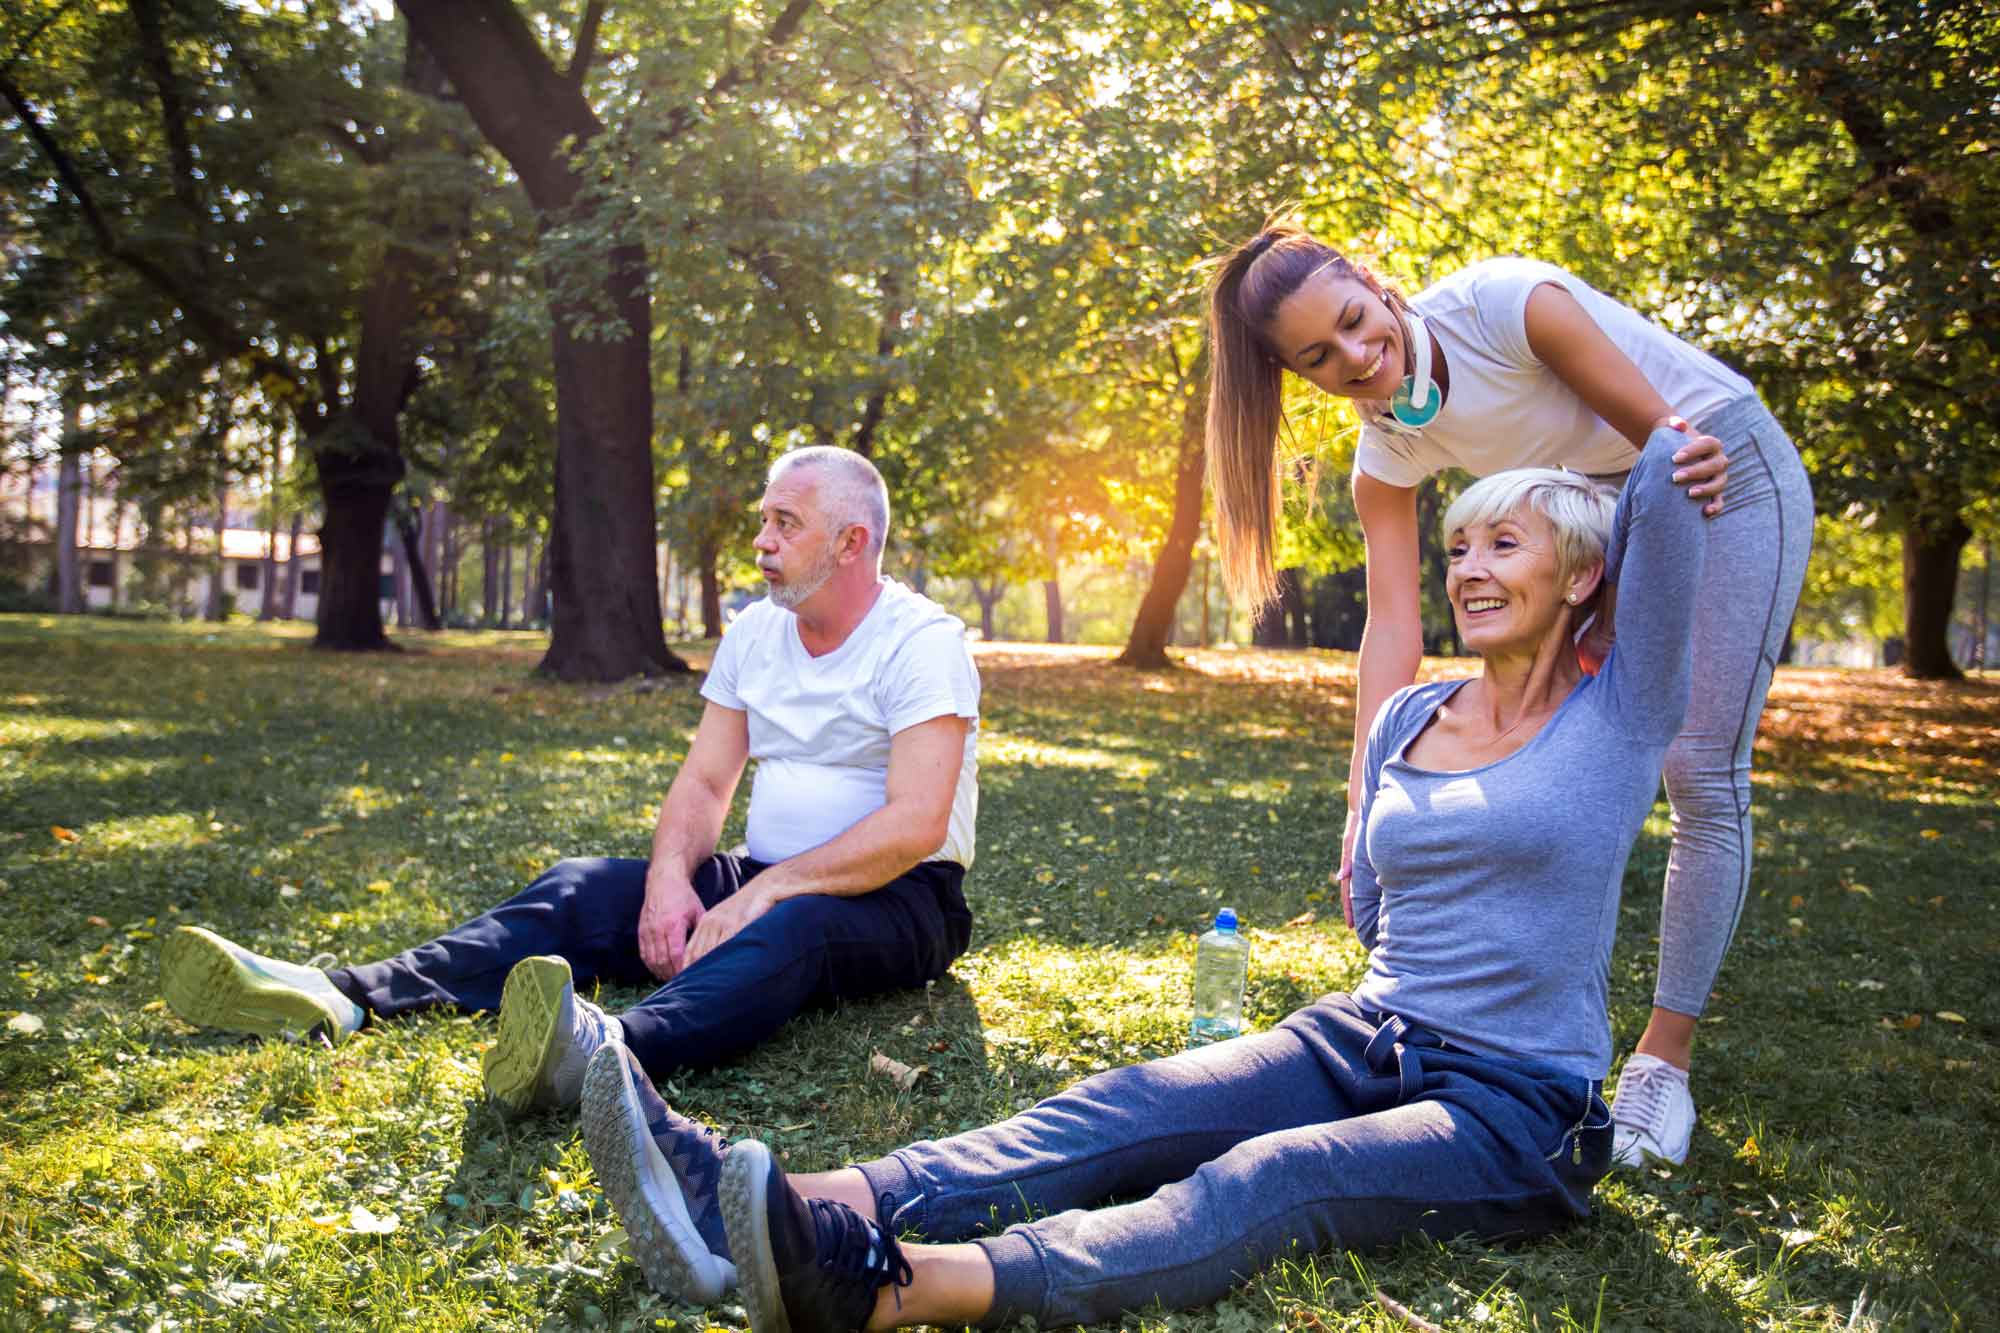 An older man and woman sitting on the grass in a park, with a physiotherapist helping the woman stretch her arms.